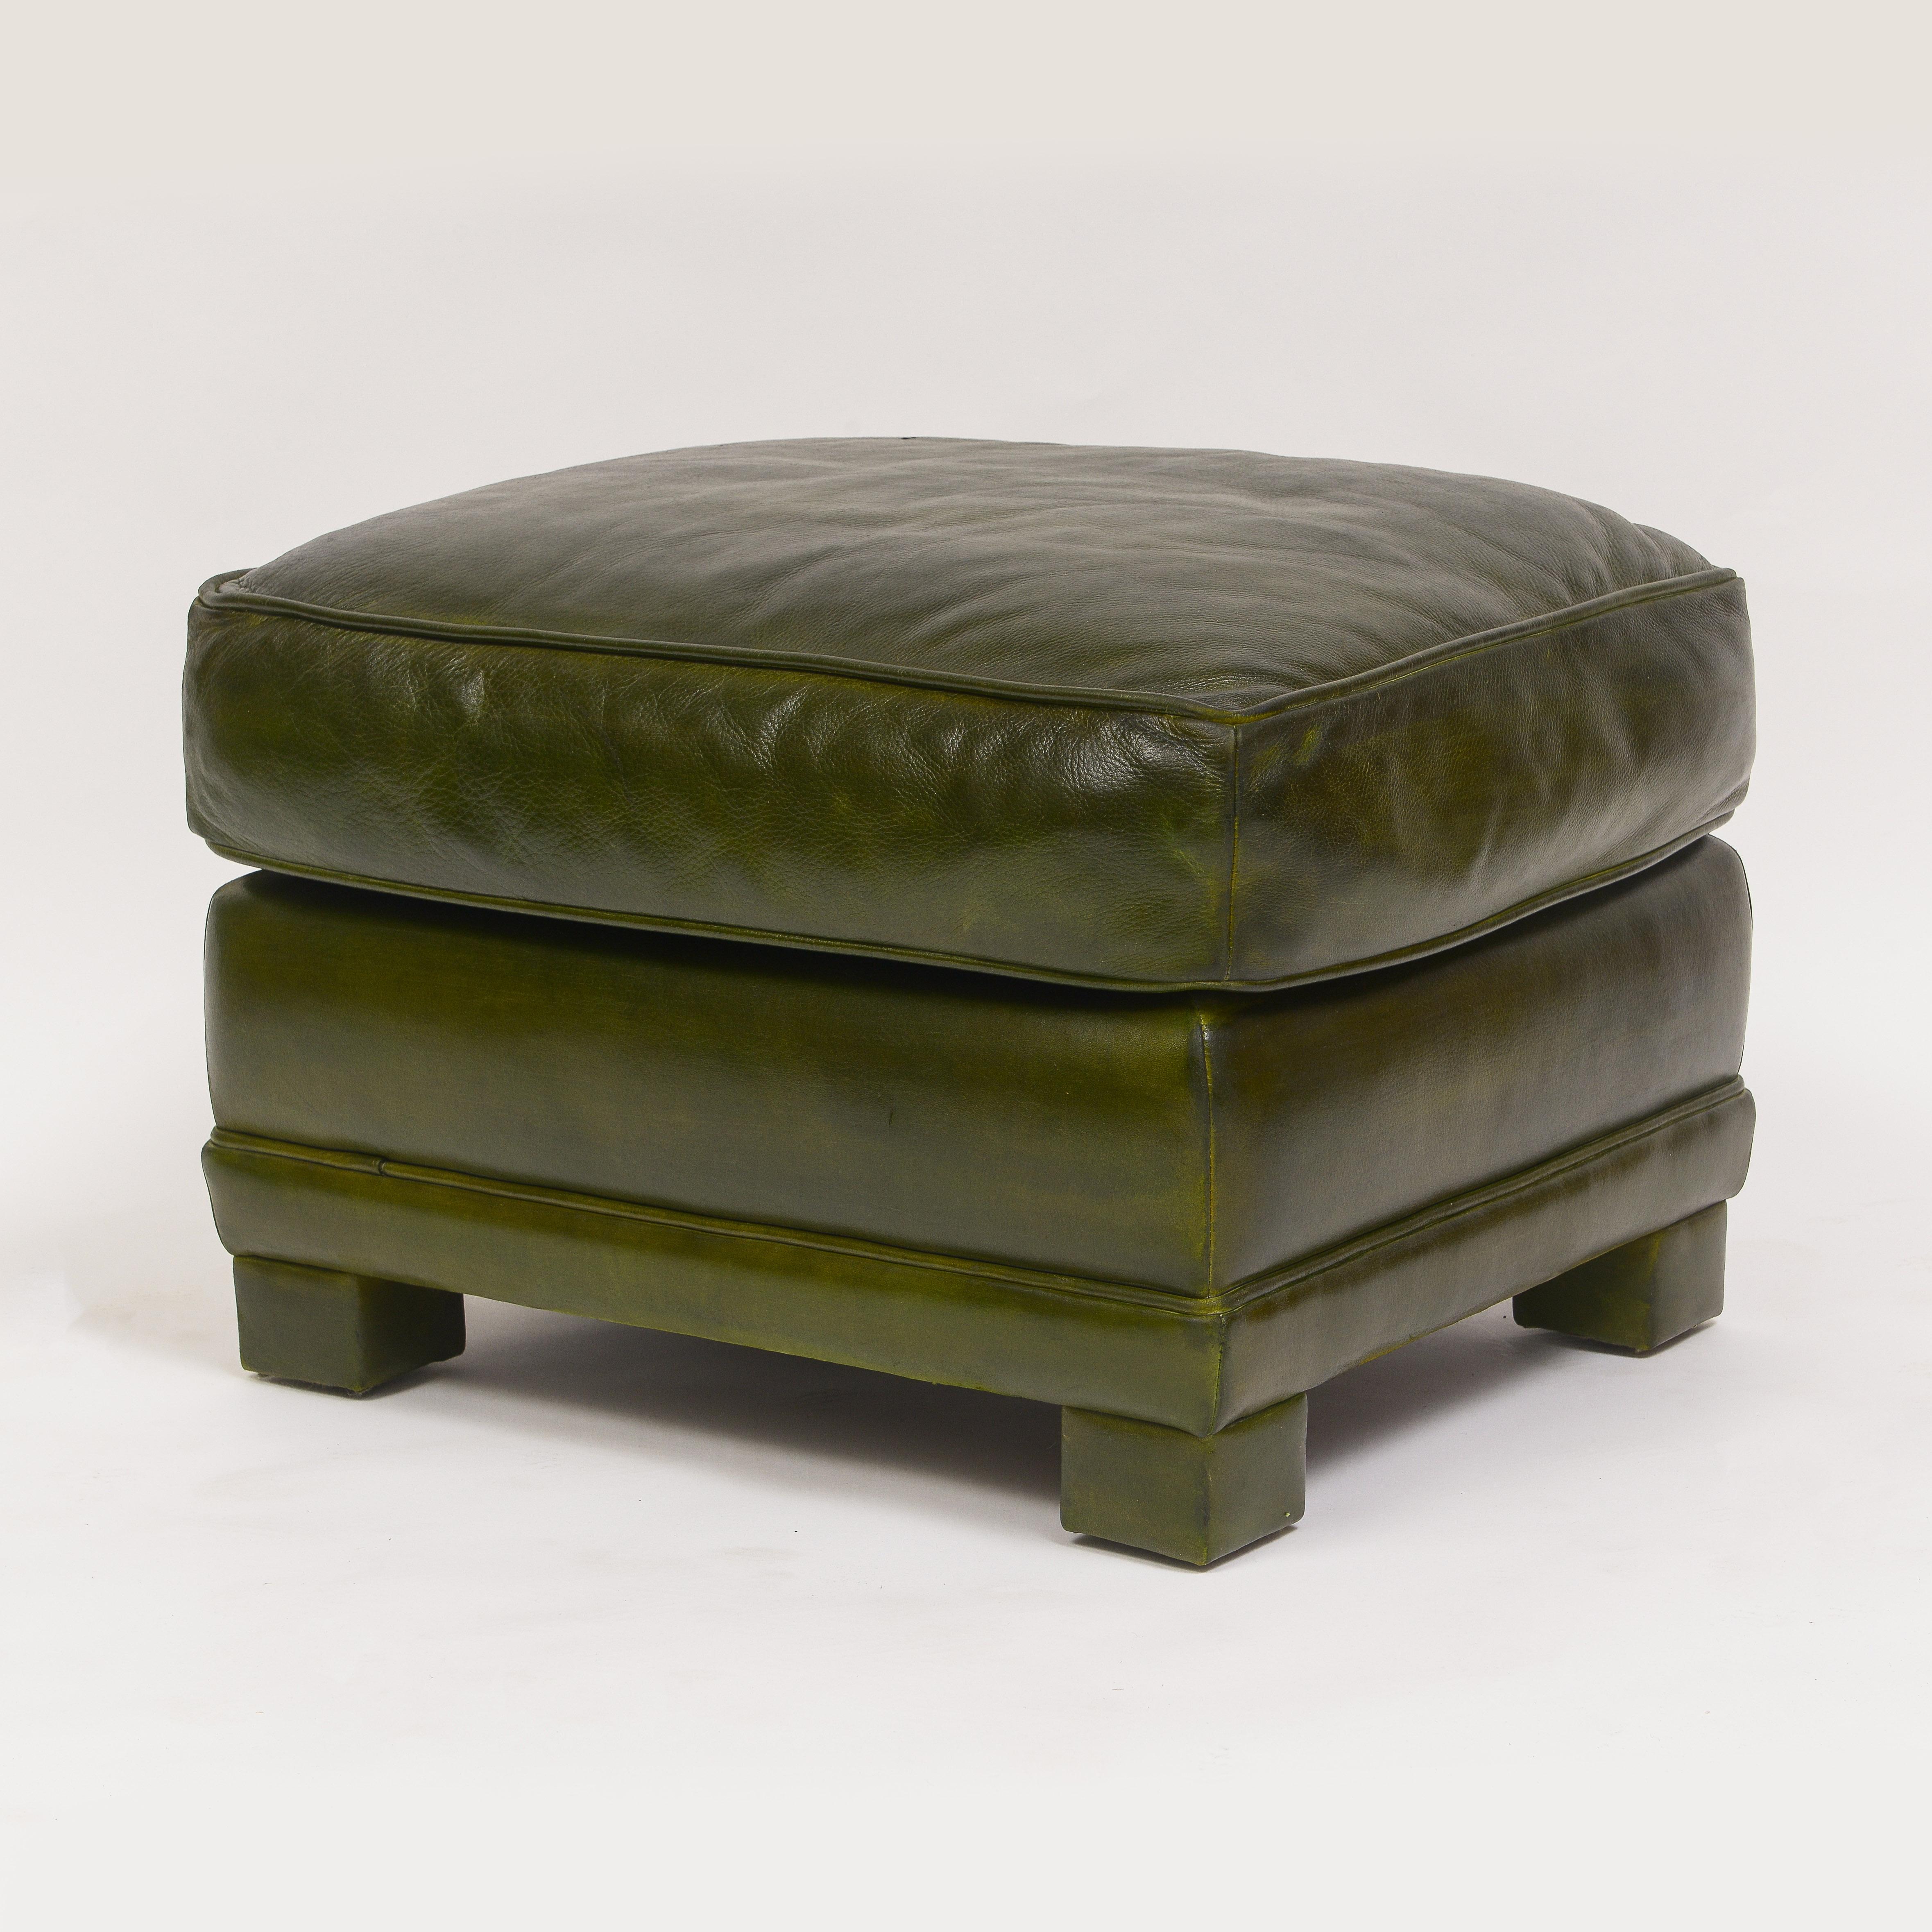 Early 21st Century Green Leather Club Chairs With Ottomans- 4 Pieces For Sale 6